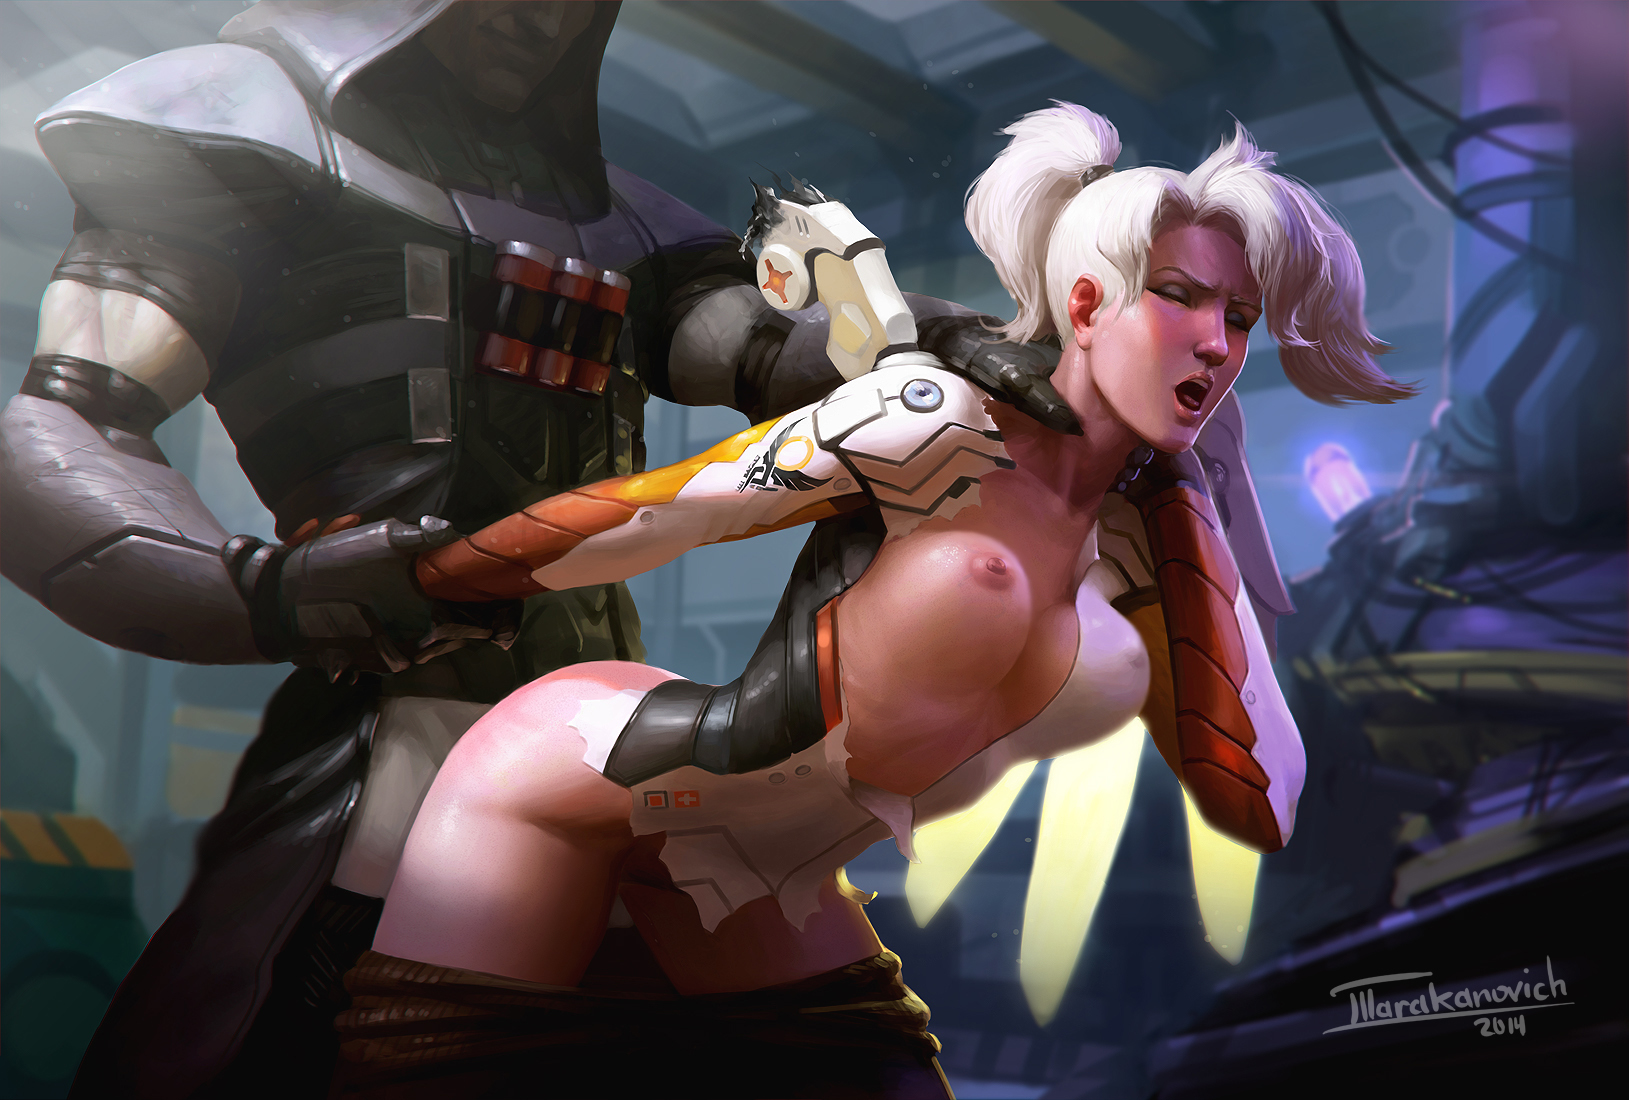 Even More Hot Overwatch Porn Parody Artworks From Mercy